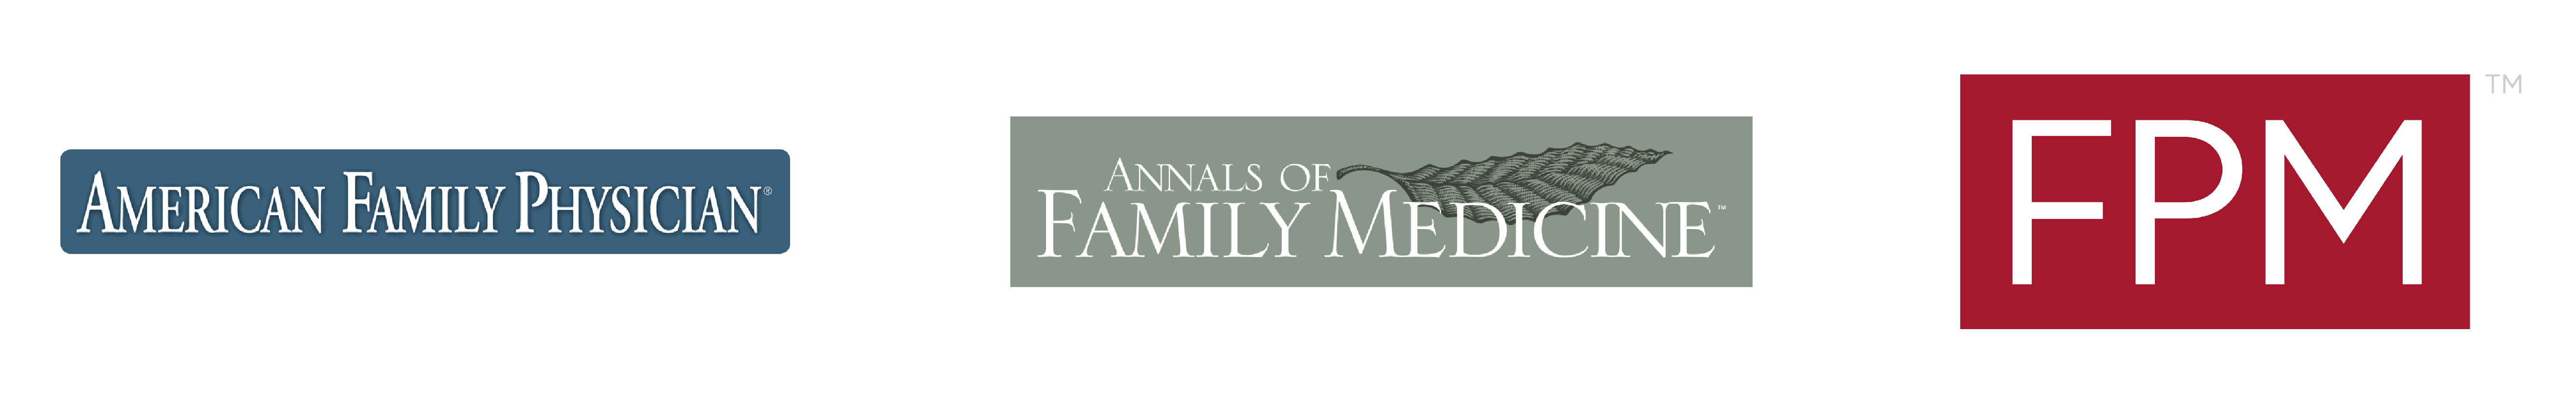 american family physician annals of family medicine fpm logos